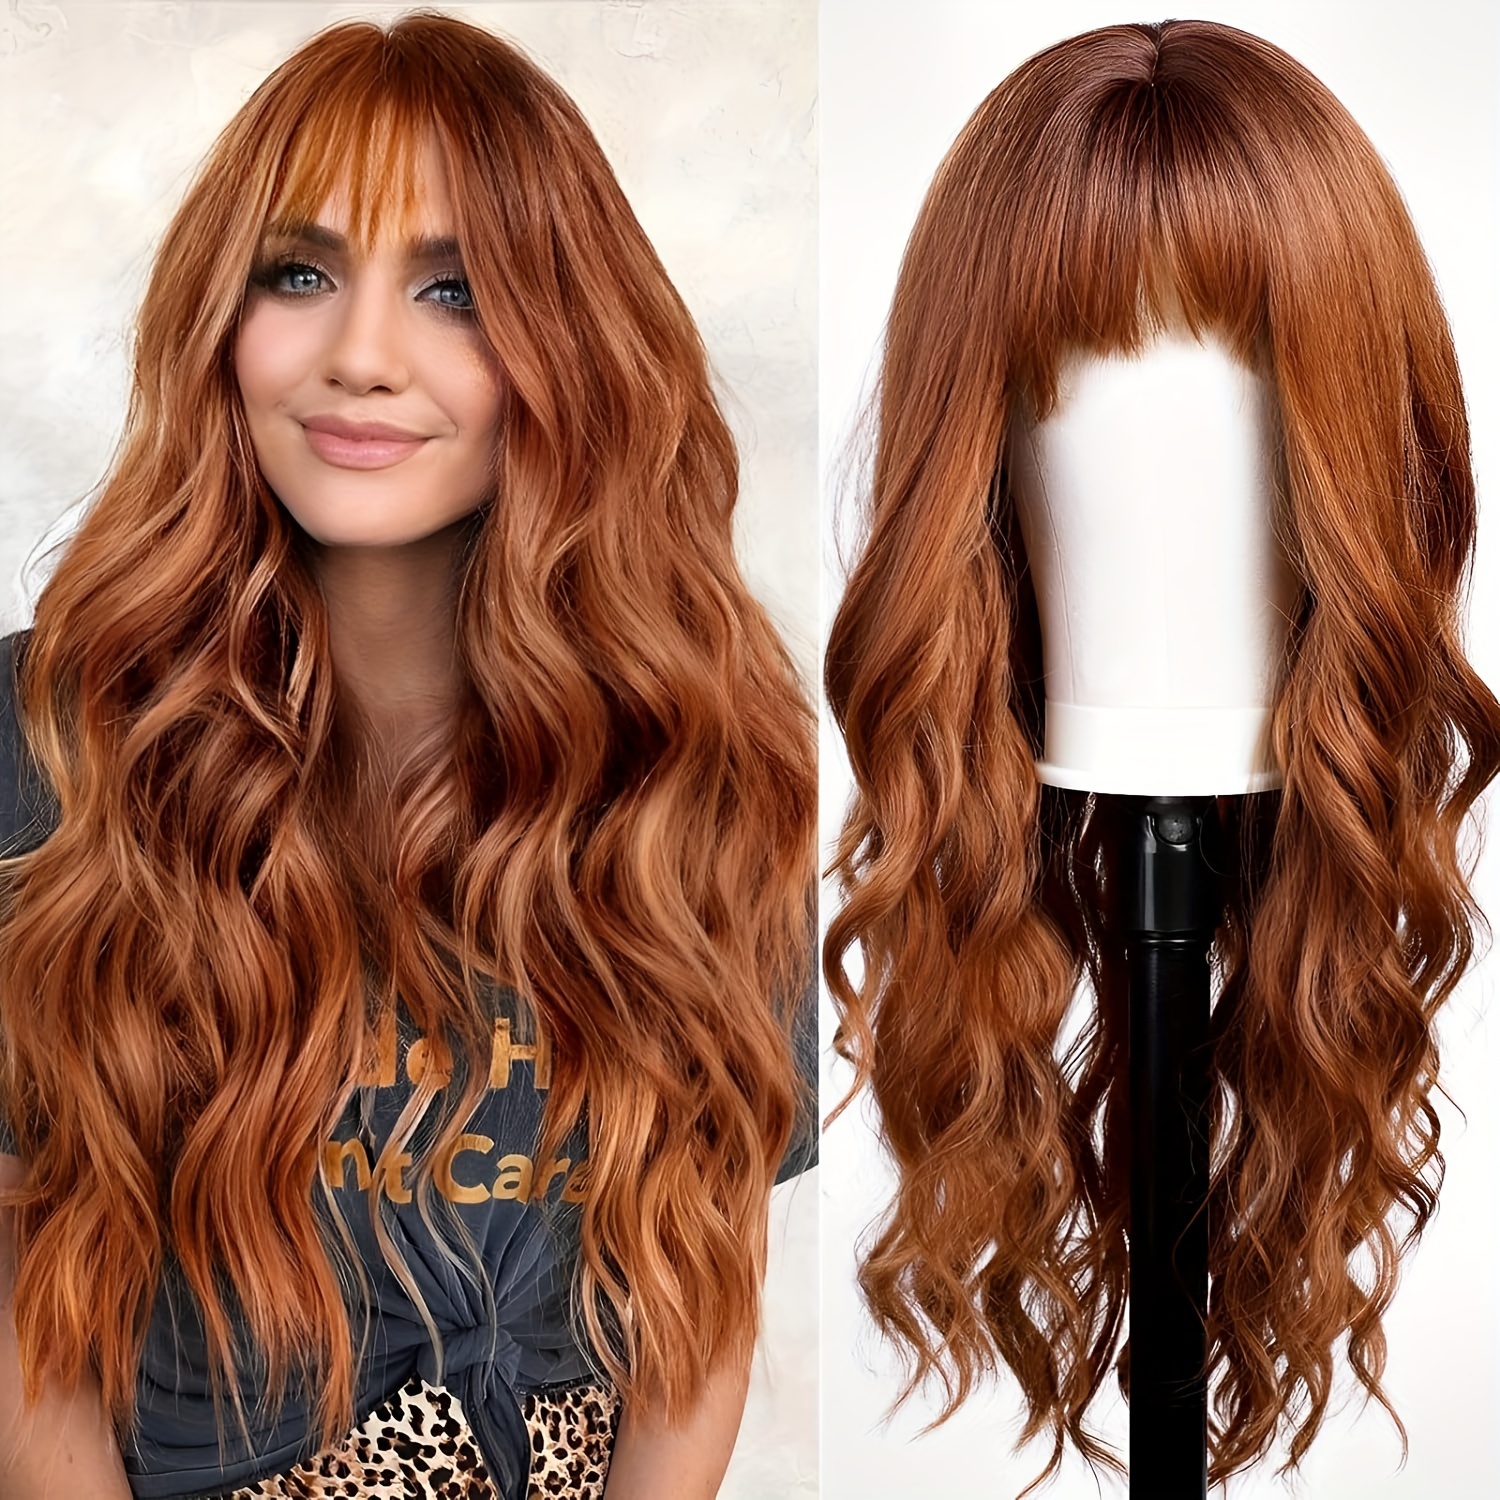 

Long Curly Wavy Wig With Bangs Synthetic Wig Beginners Friendly Heat Resistant Elegant For Daily Use Wigs For Women